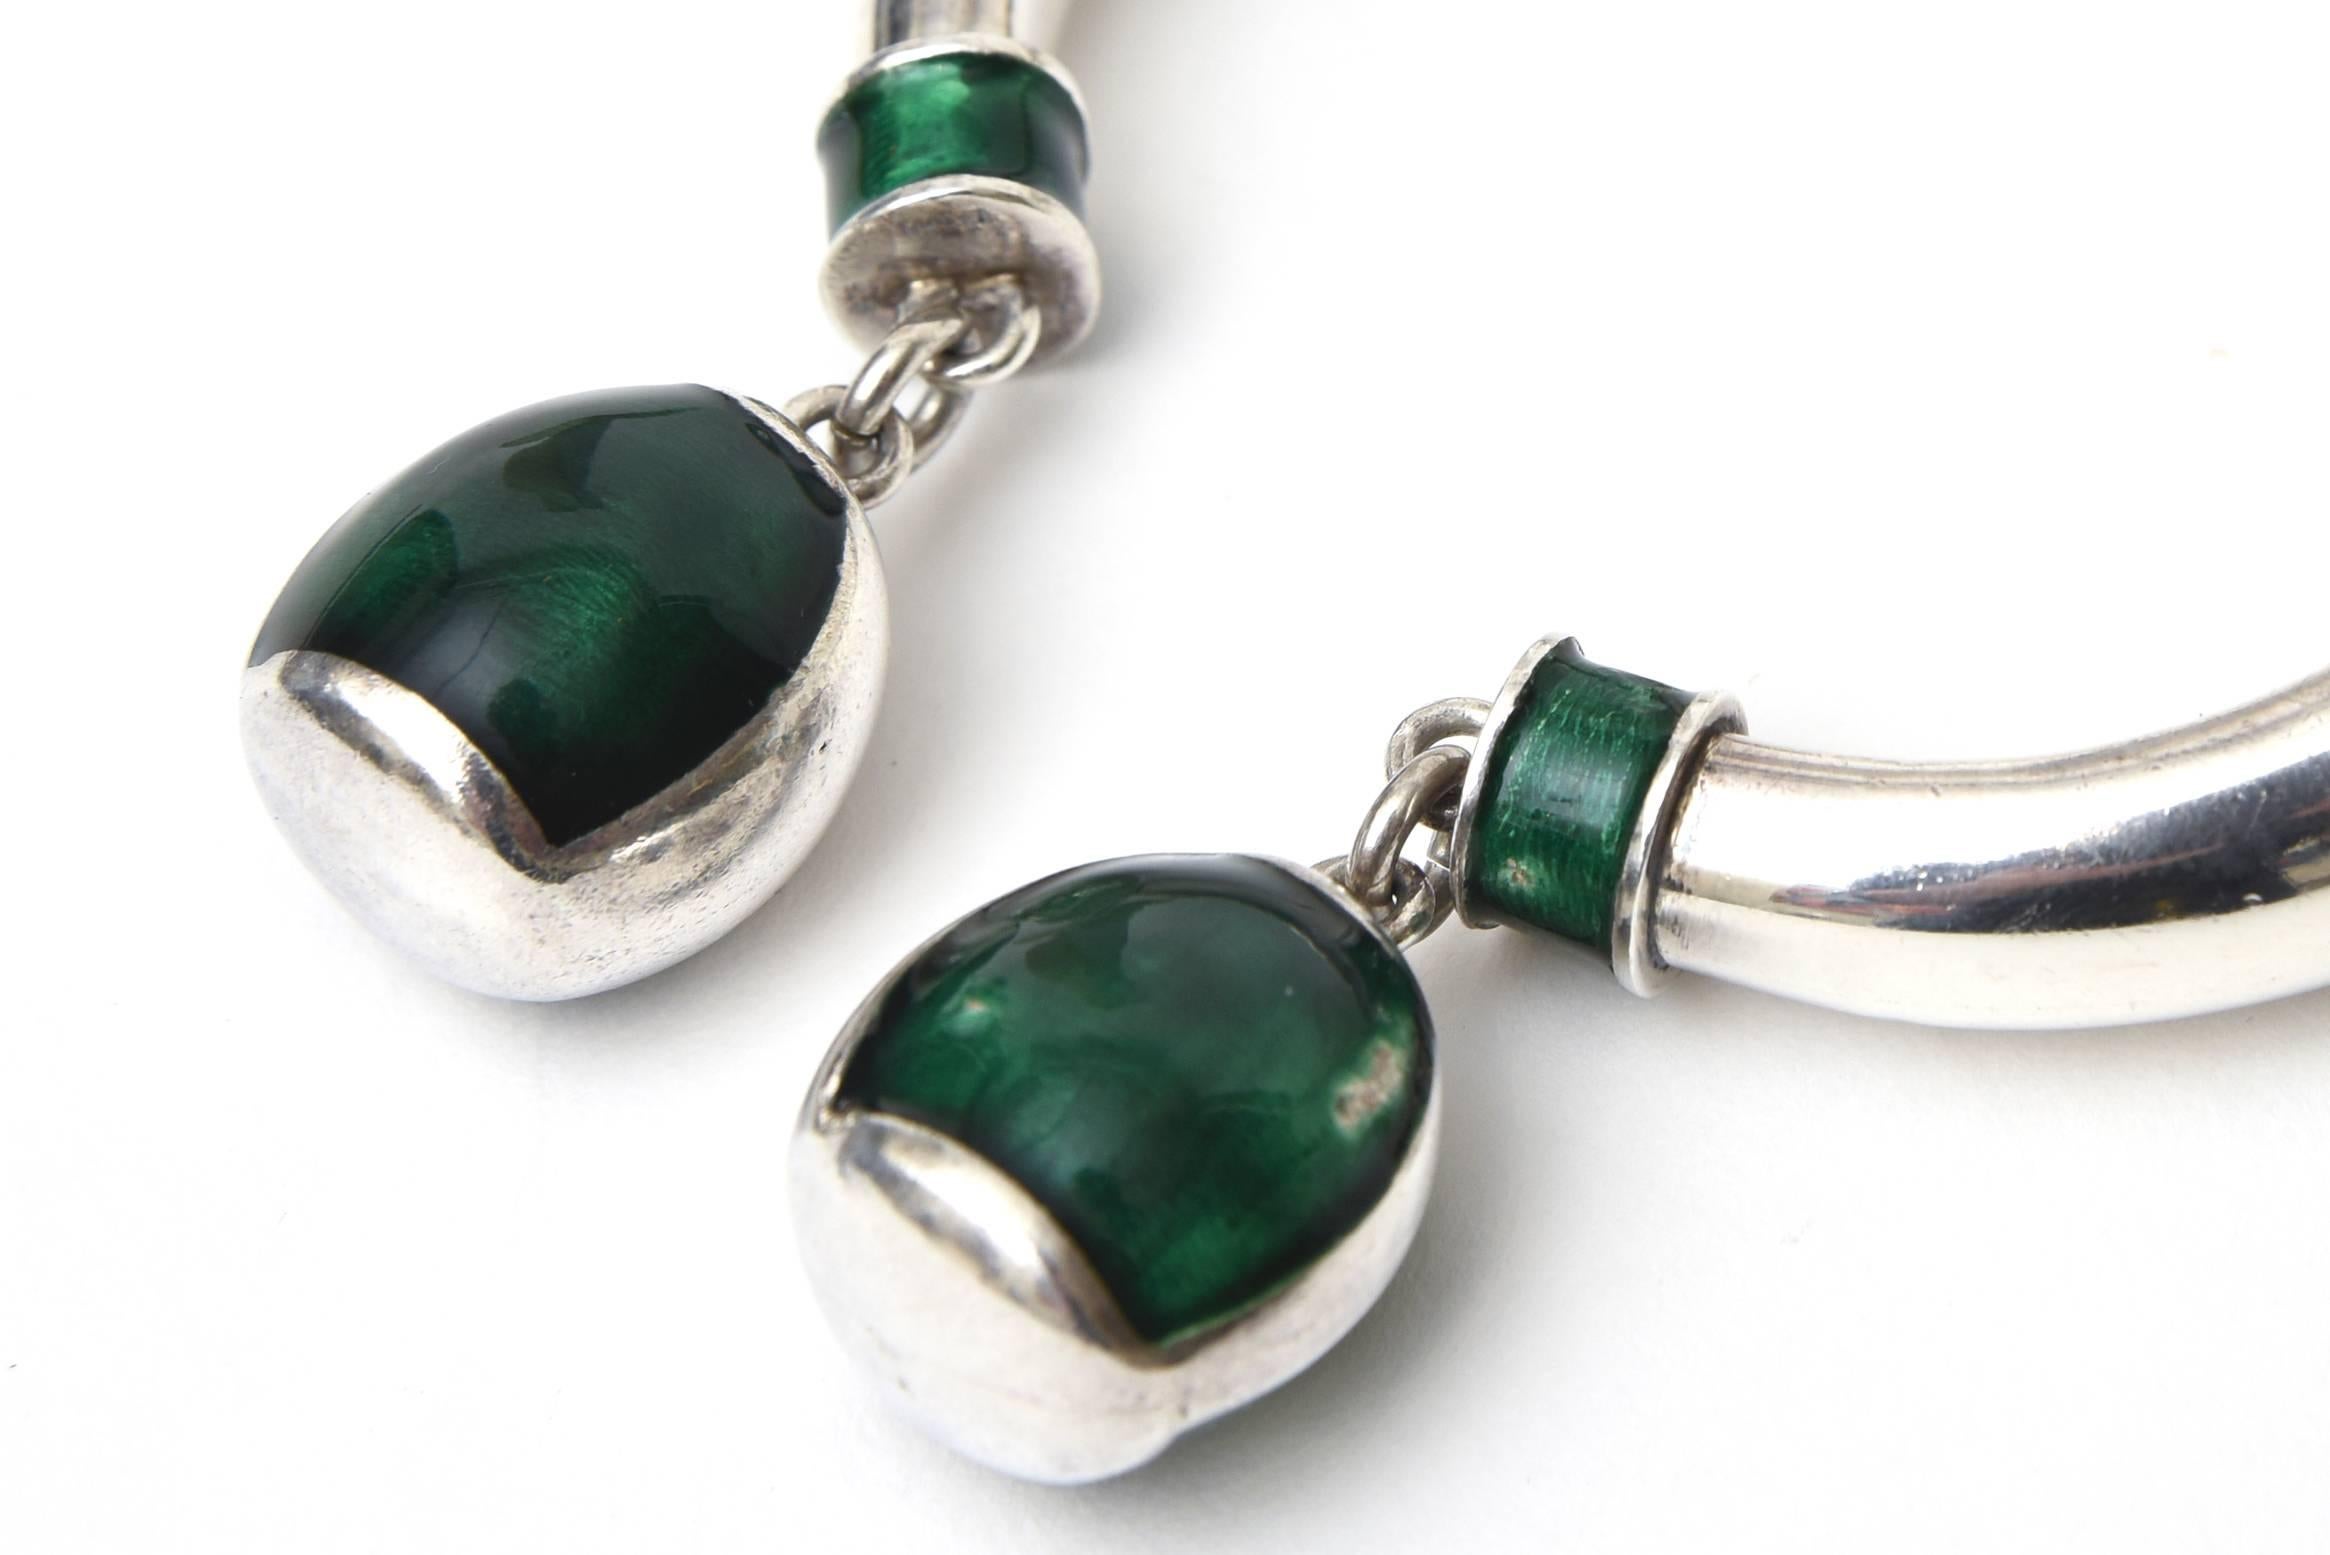 This amazing signed vintage Italian Gucci sterling silver and green malachite enamel bracelet is unusual and rare. It is marked Gucci Italy 925. The hanging pendants add to the sculptural form. There is a hinge to get it on. This will fit a small to